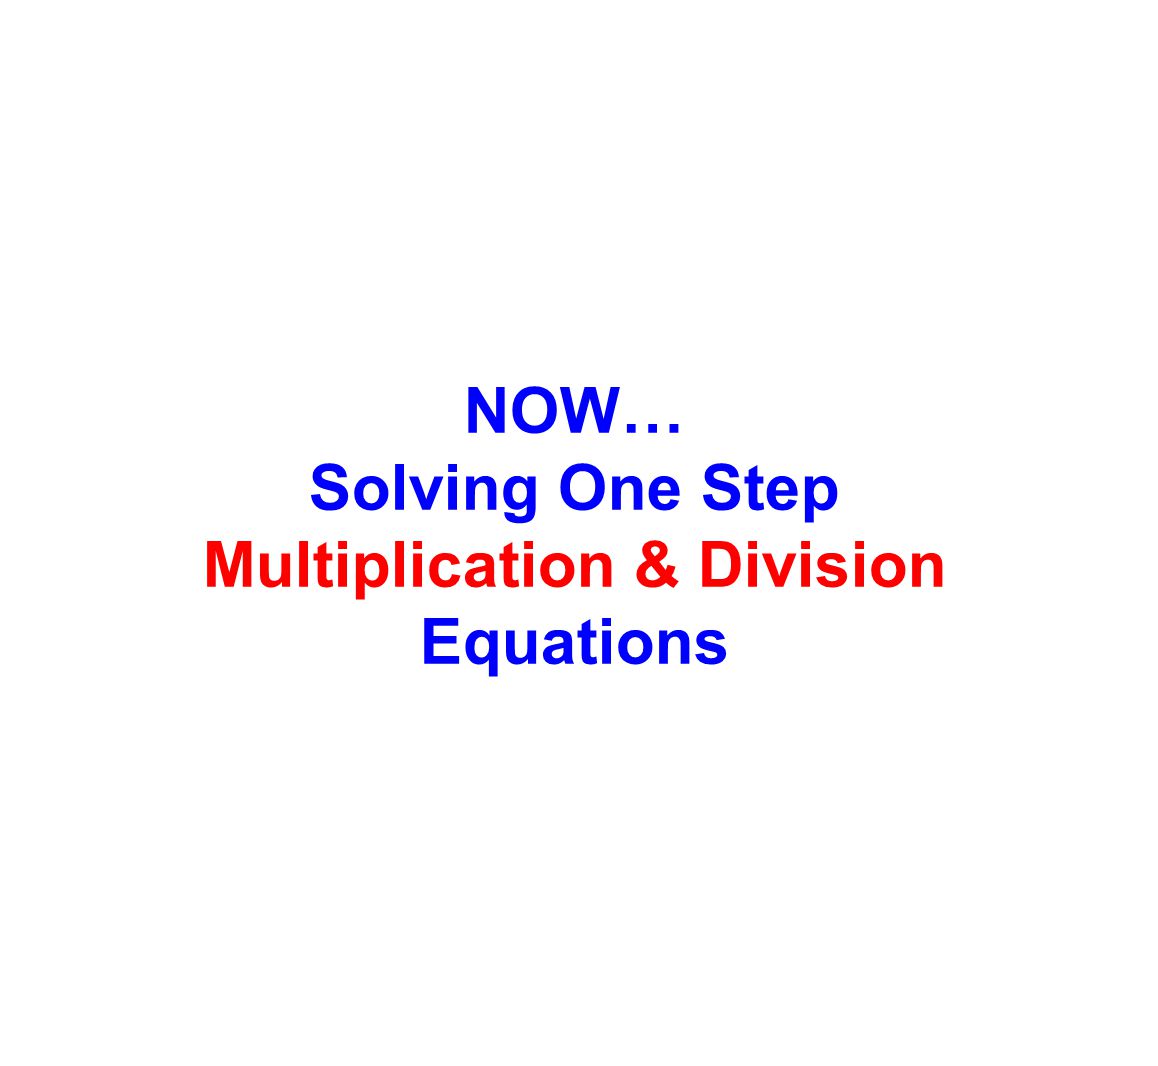 Solving One Step Multiplication & Division Equations